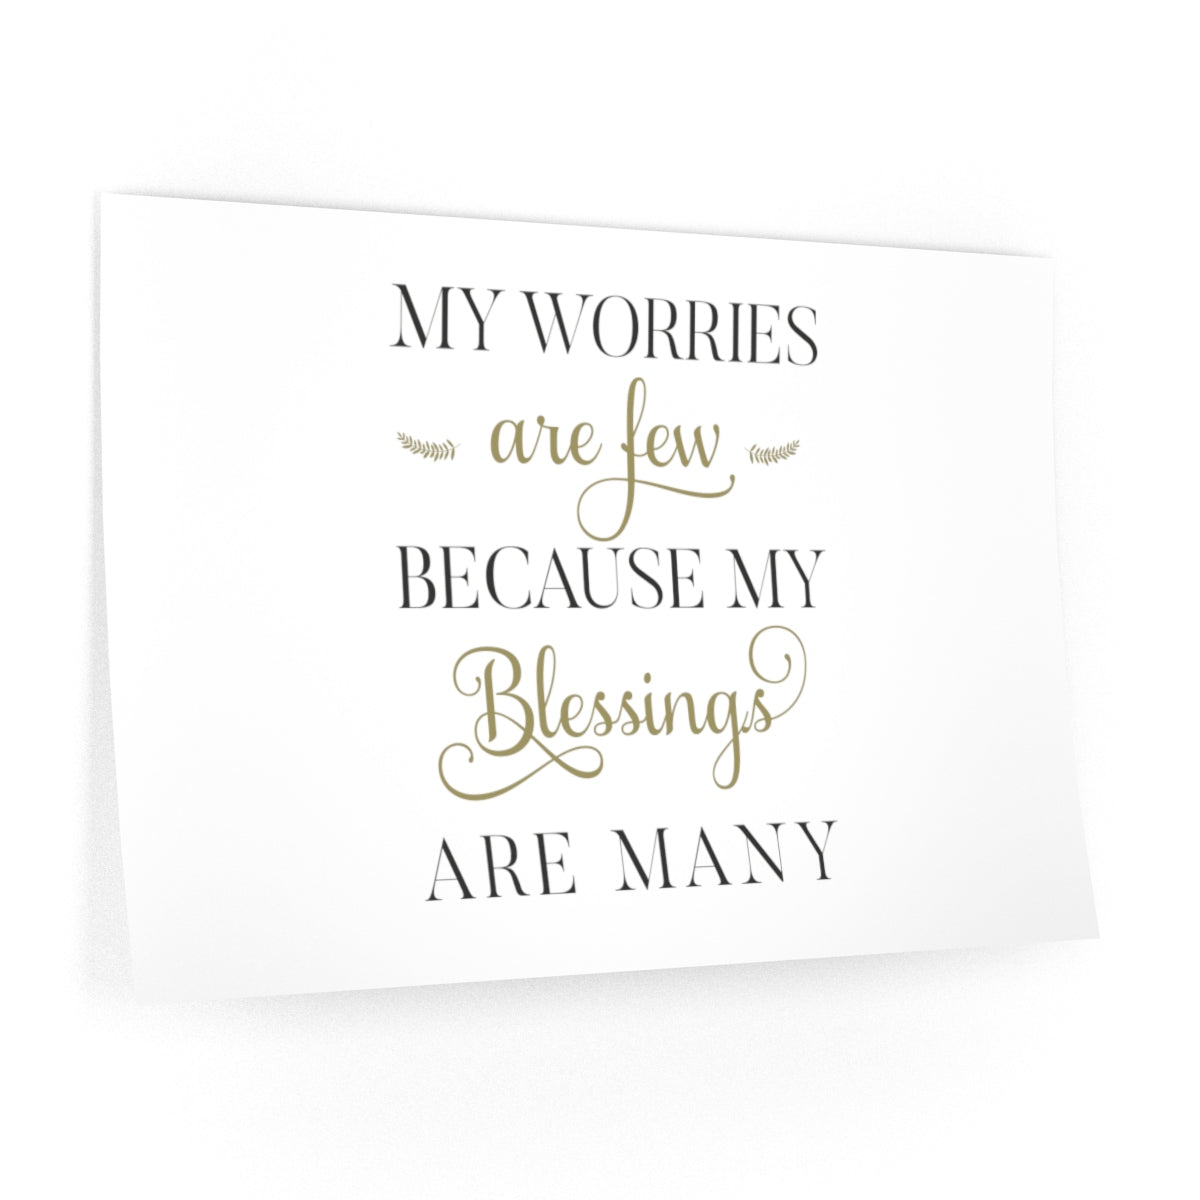 My Worries Are Few Because My Blessings Are Many Wall Decal - Inspired By Savy